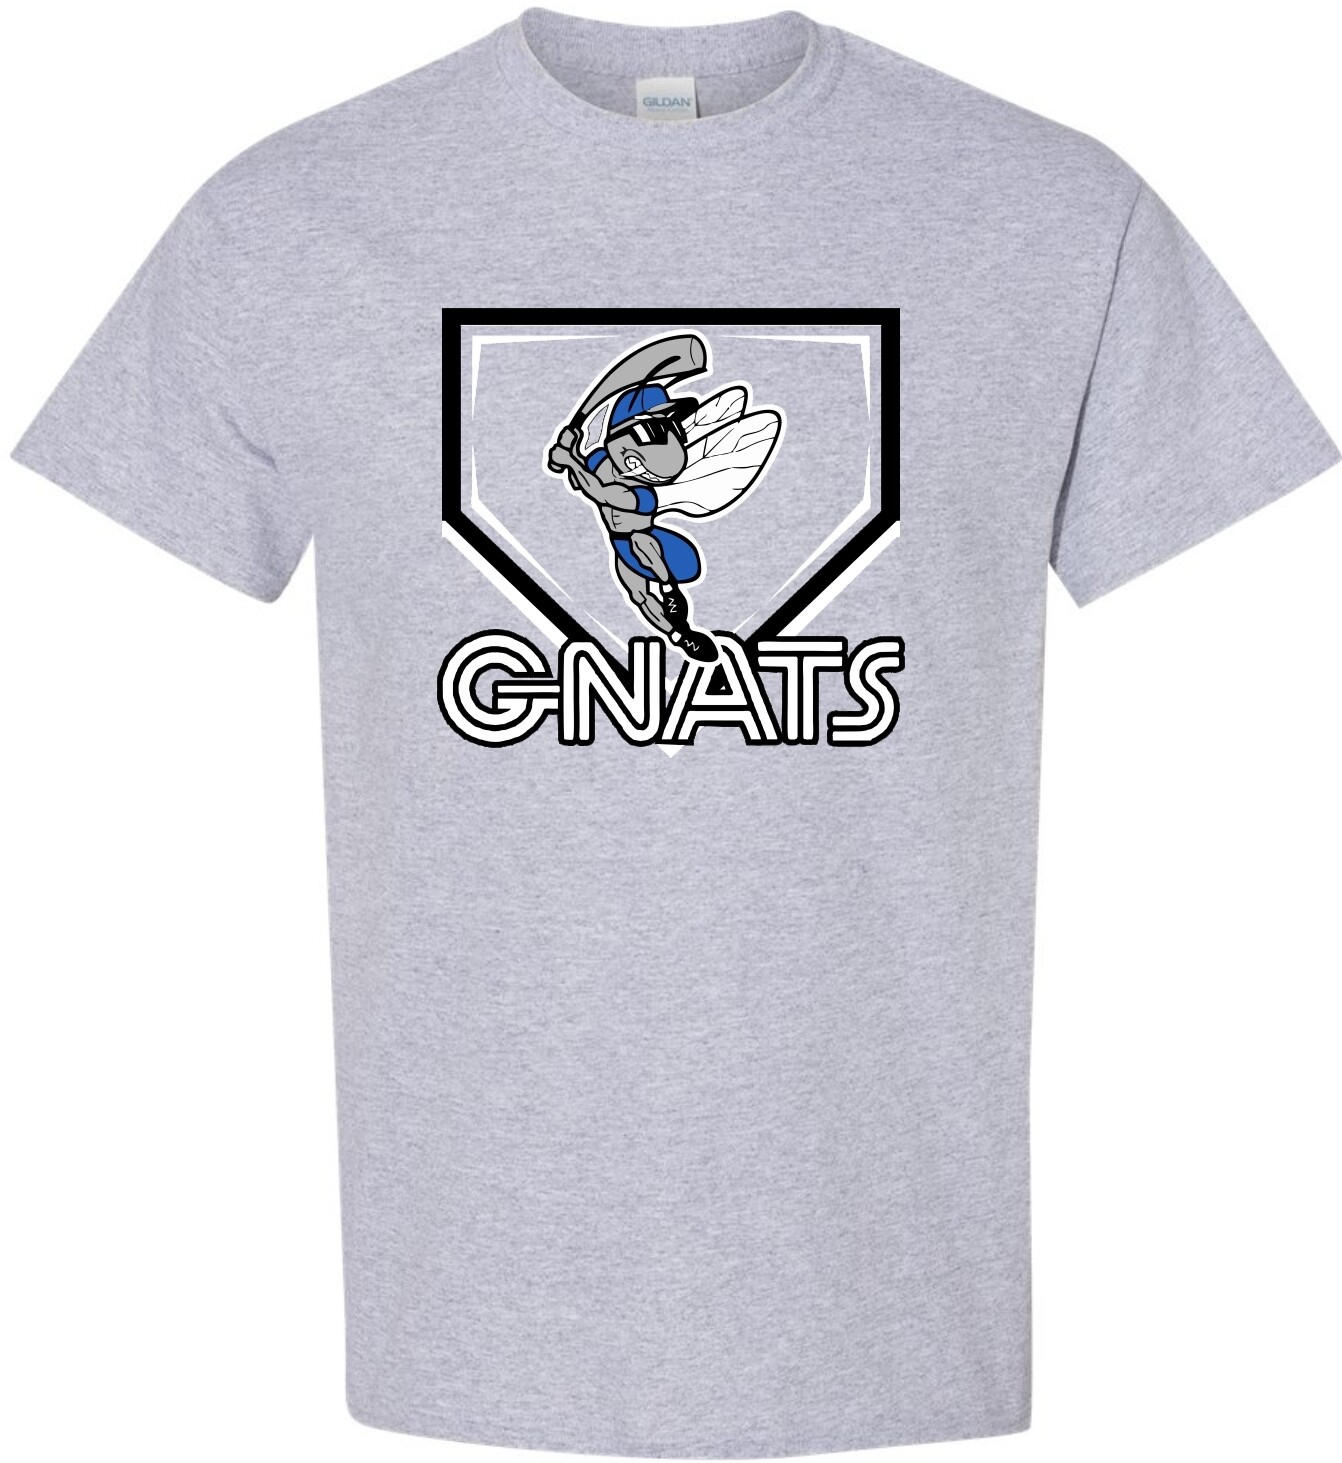 GNATS-64000 GRAY SOFT STYLE